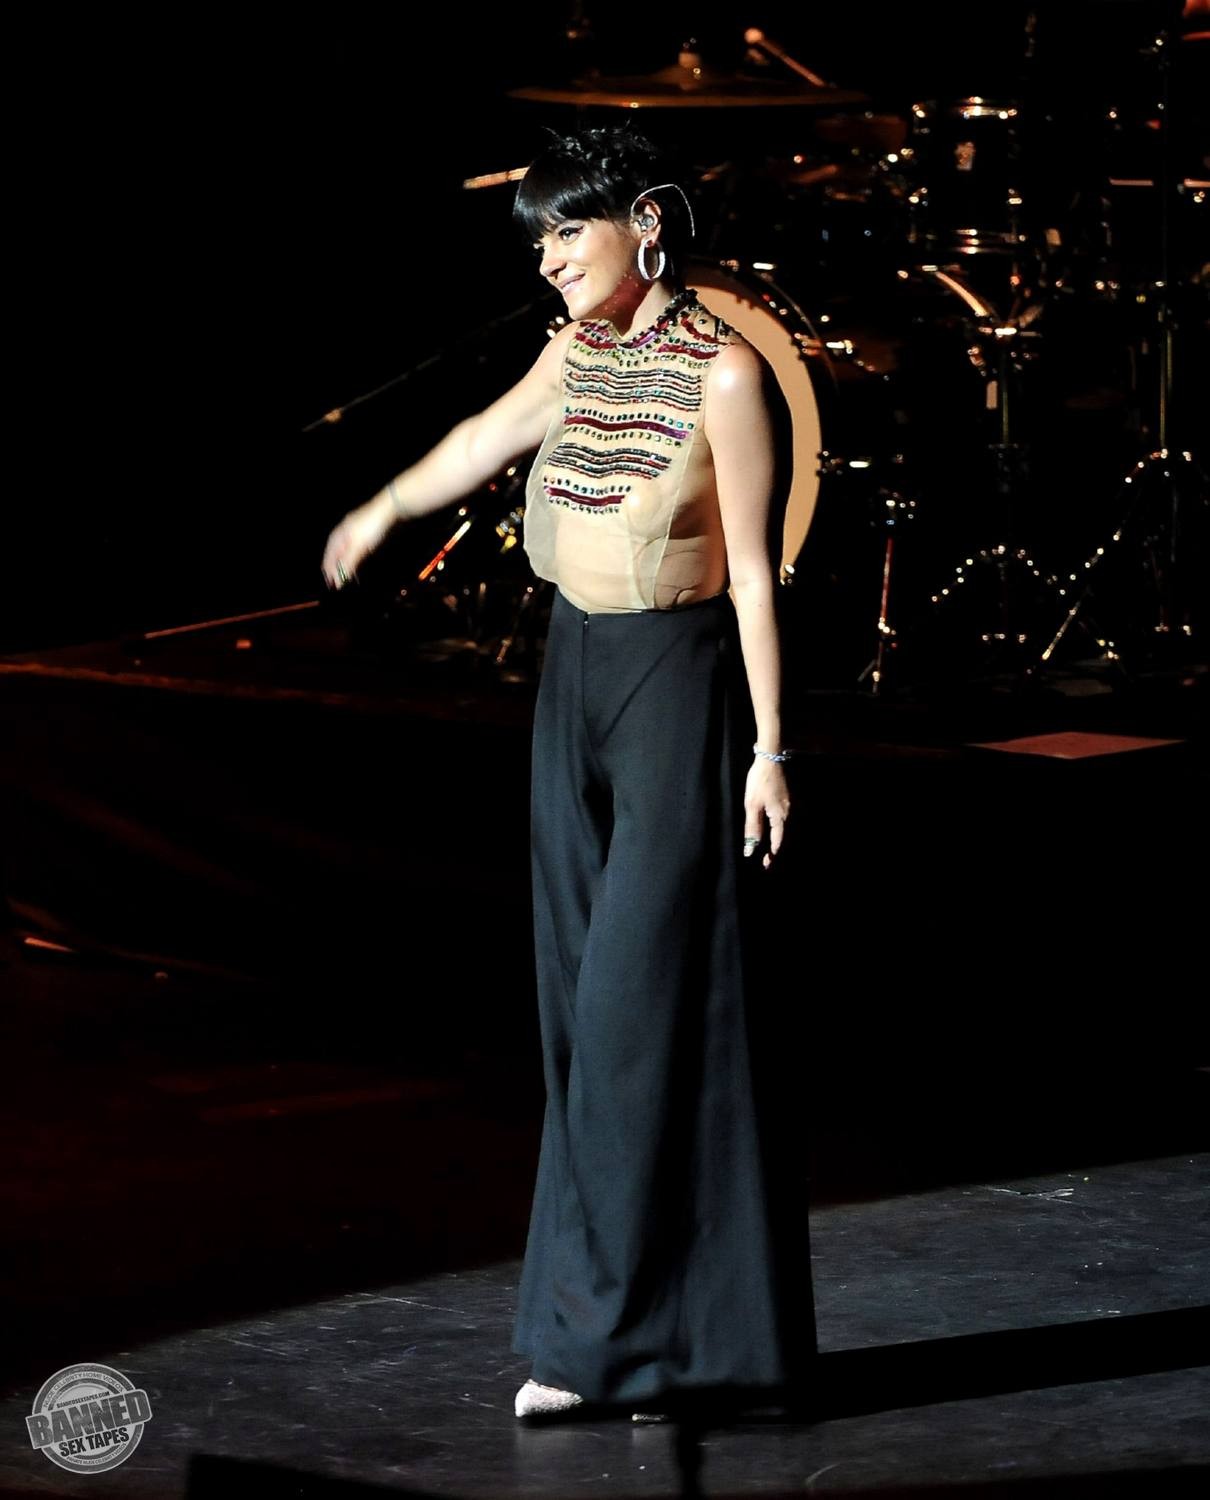 Lily Allen  see her nude tits through transparent top during concert #75191585